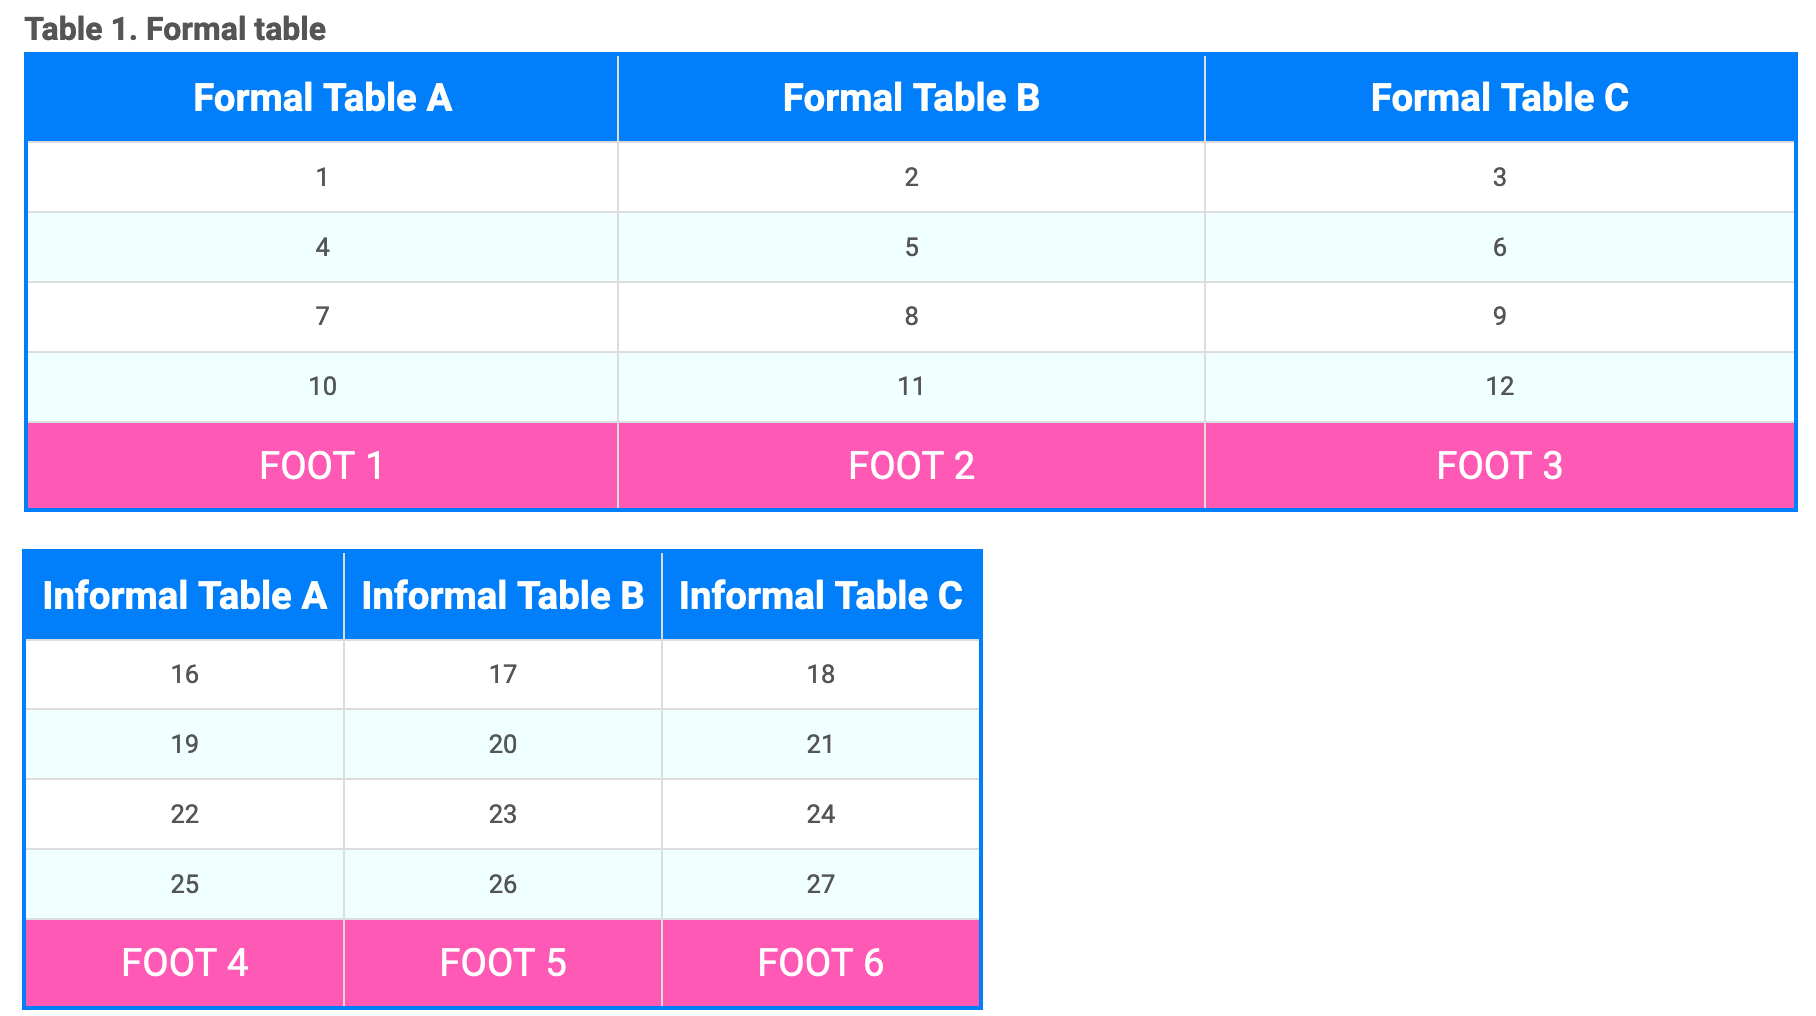 A formal table and an informal table. Both have the same custom styling. Blue headers with white text, light blue background on alternate rows, pink footer with white text. The cells of the table have a thin grey border line. The table has a blue outline.